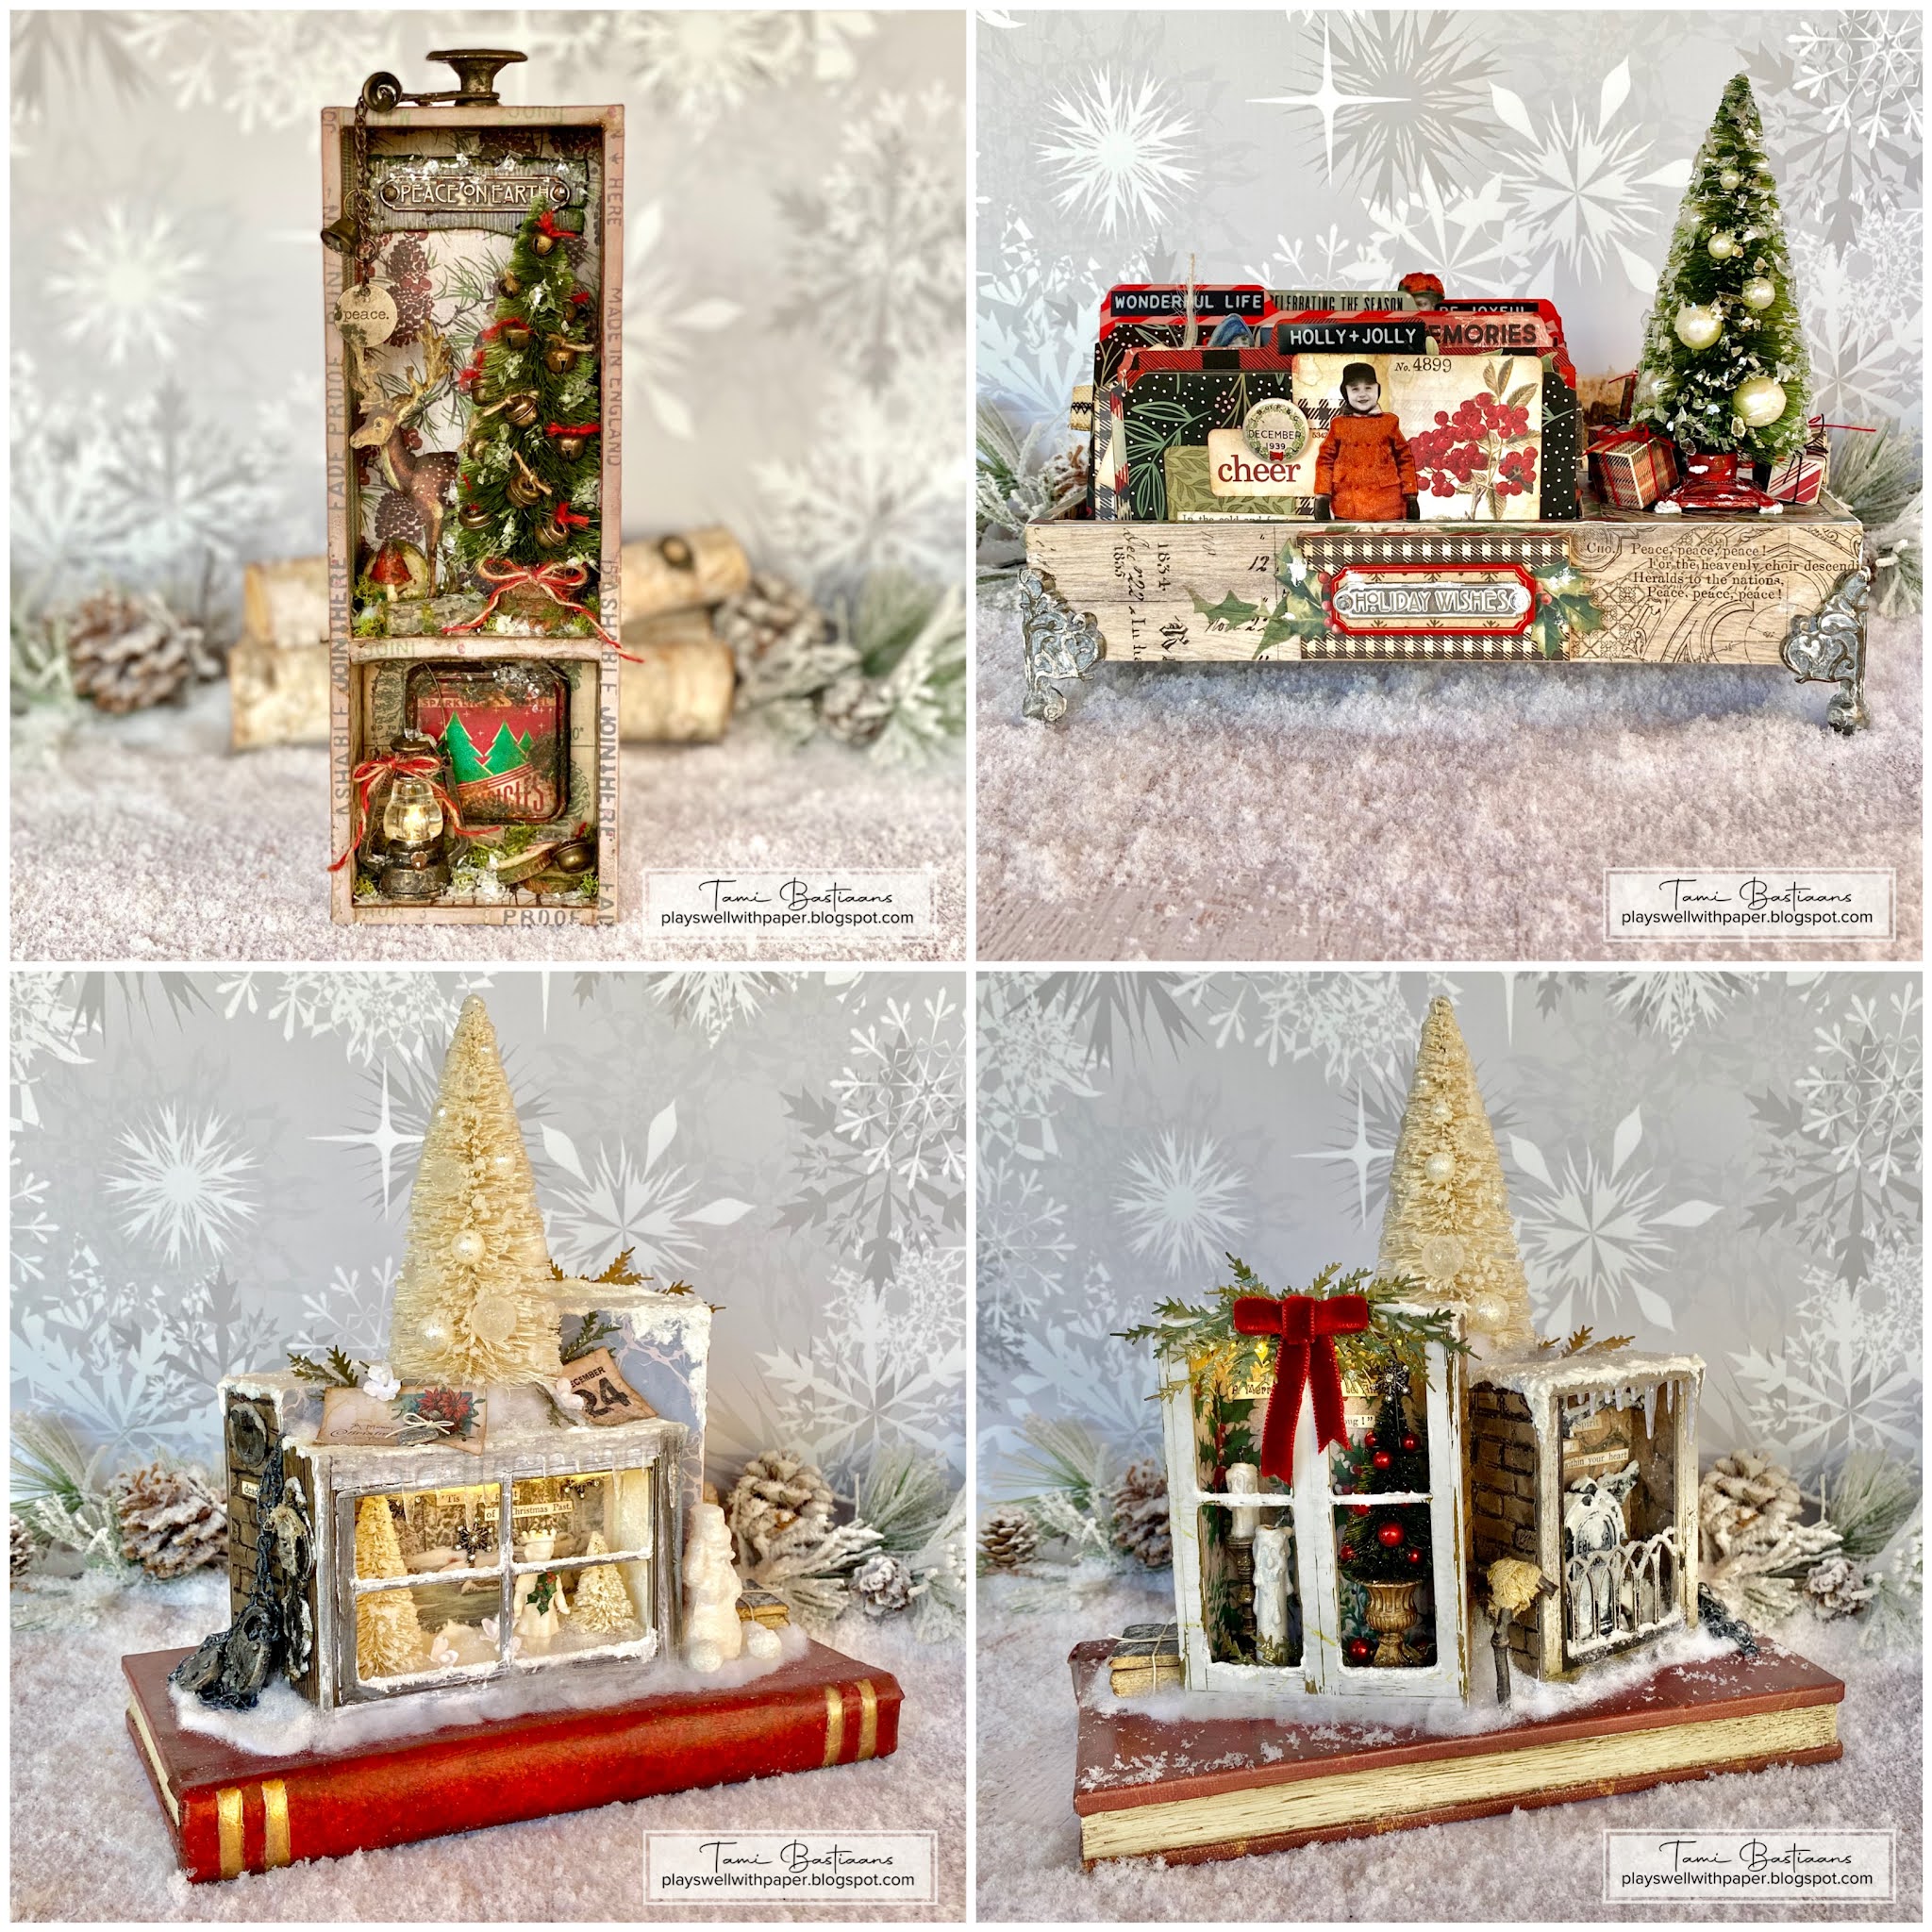 Plays Well With Paper: Tim Holtz Christmas Ideaology Samples 2021